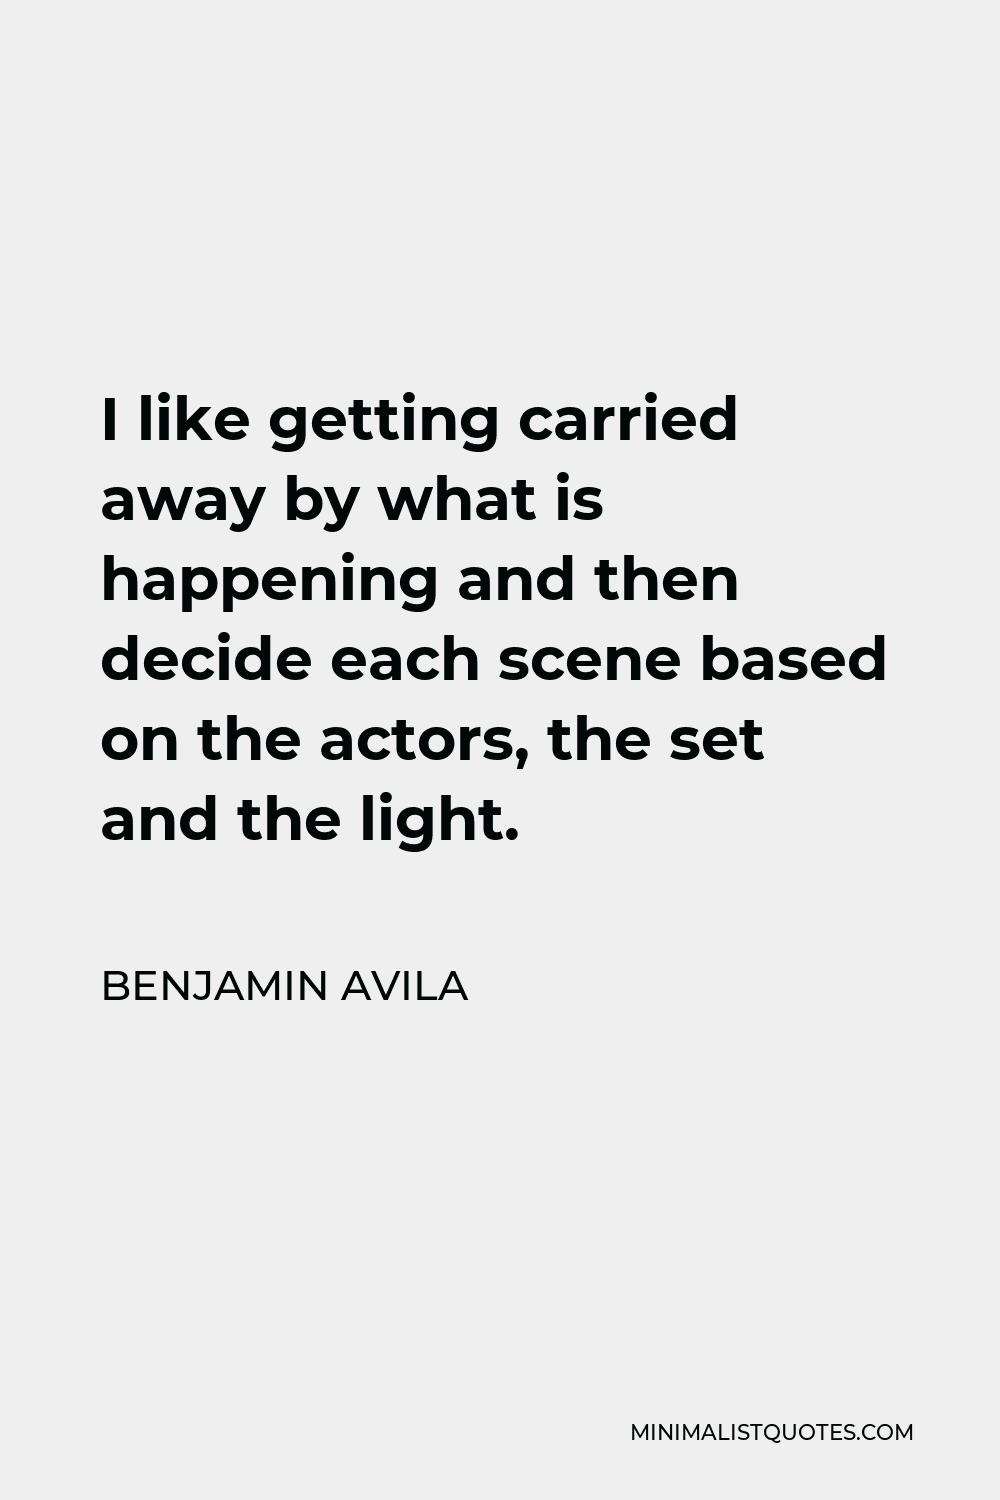 Benjamin Avila Quote - I like getting carried away by what is happening and then decide each scene based on the actors, the set and the light.